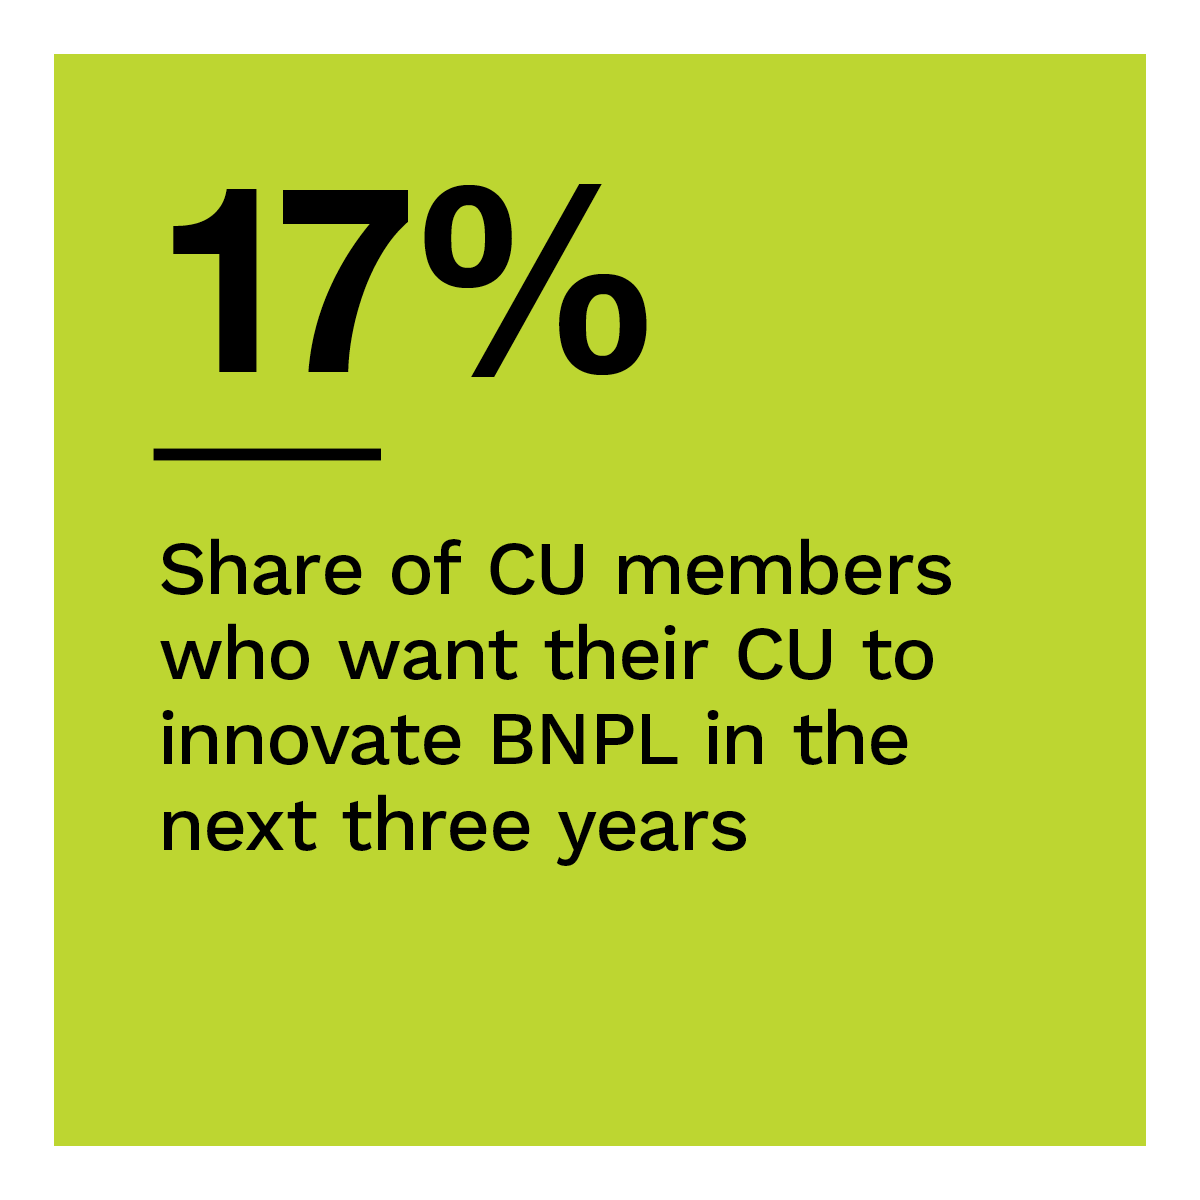 17%: Share of CU members who want their CU to innovate BNPL in the next three years